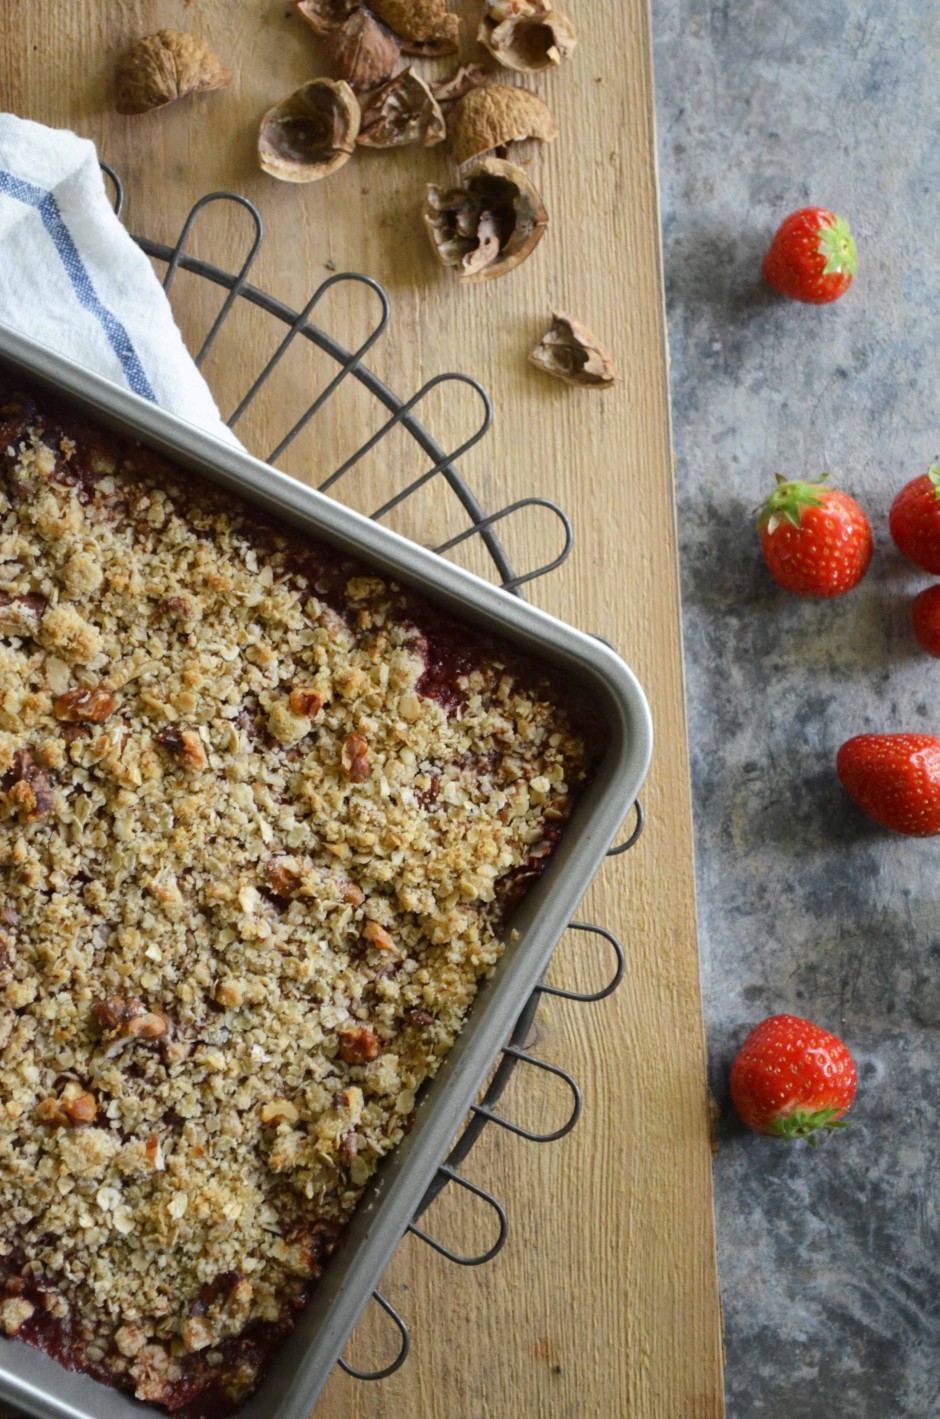 Strawberry and rhubarb crumble with walnuts. Recipe and photo by That Healthy Kitchen